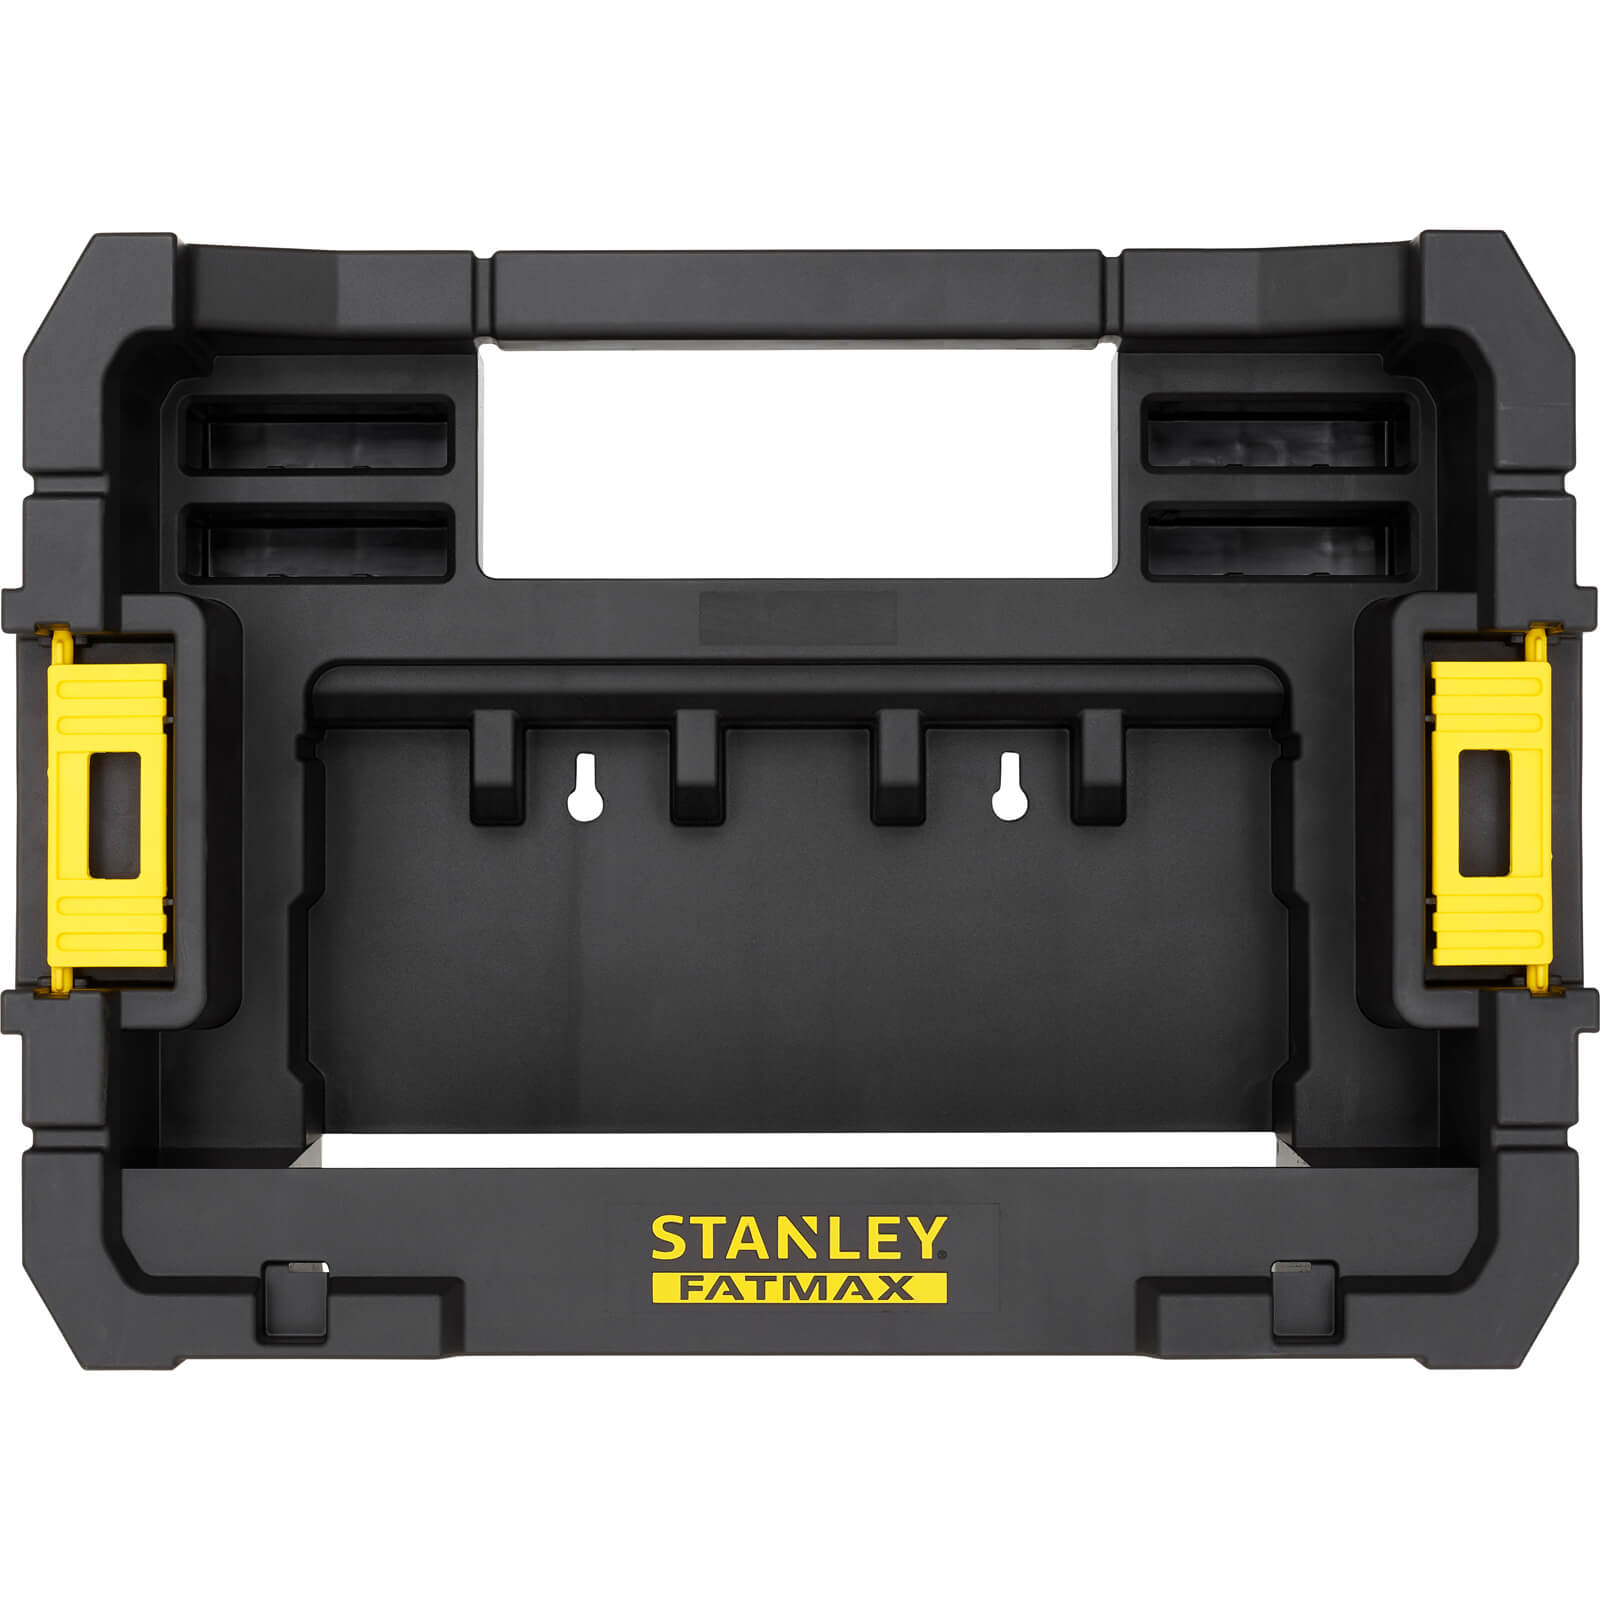 Stanley FatMax TSTAK Caddy for Bulk and Small Storage Cases